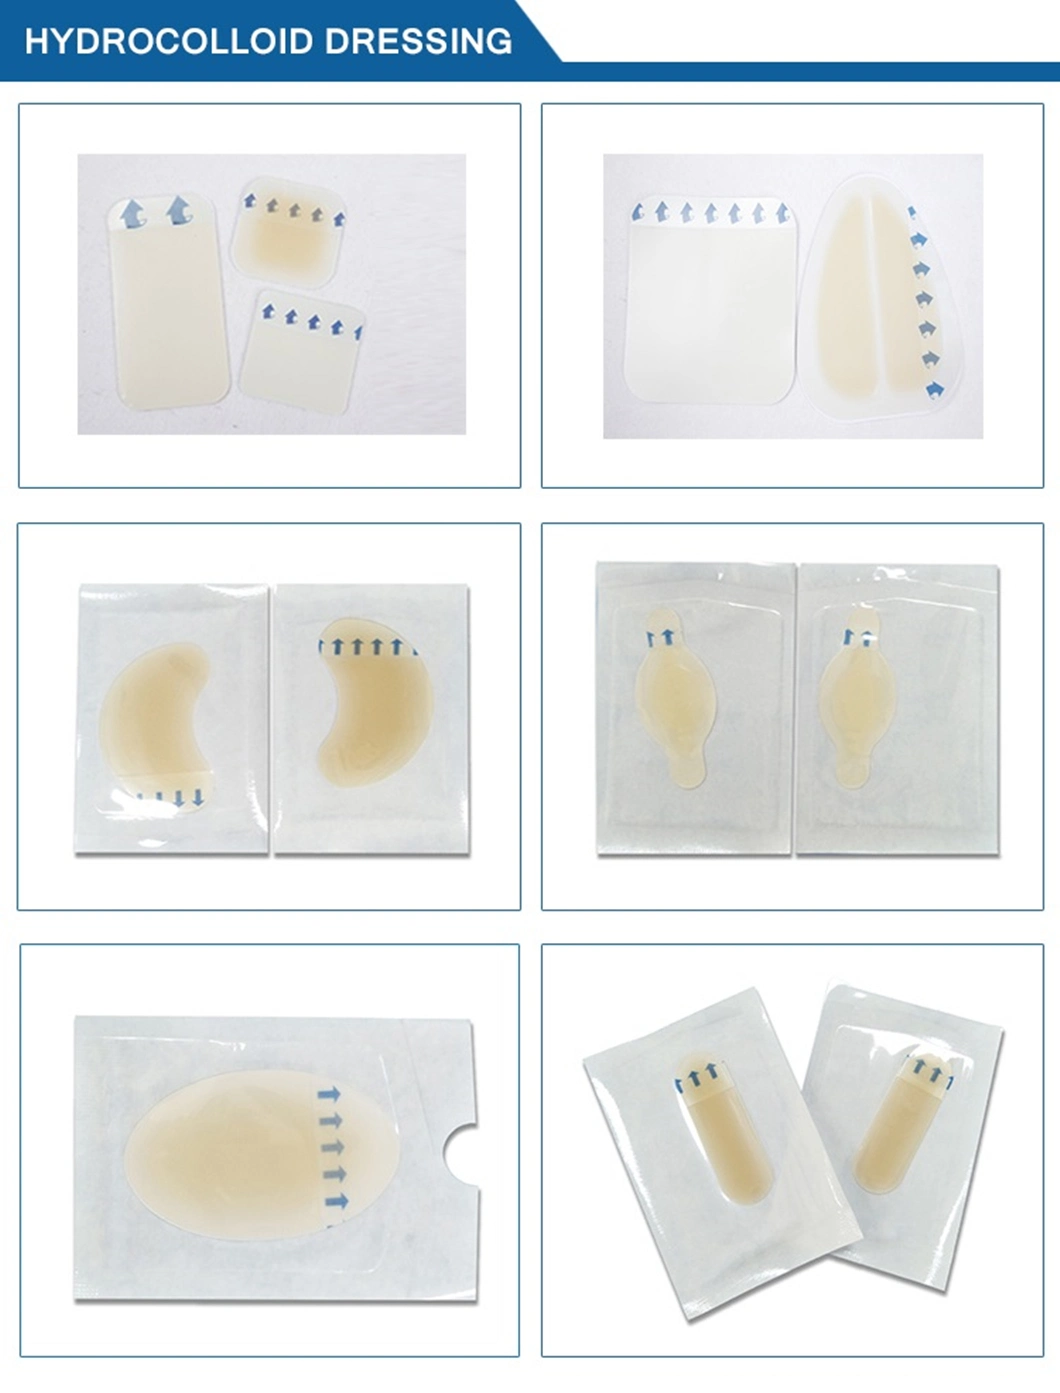 High Absorbent Non-Woven Wound Dressing Calcium Alginate Wound Dressing